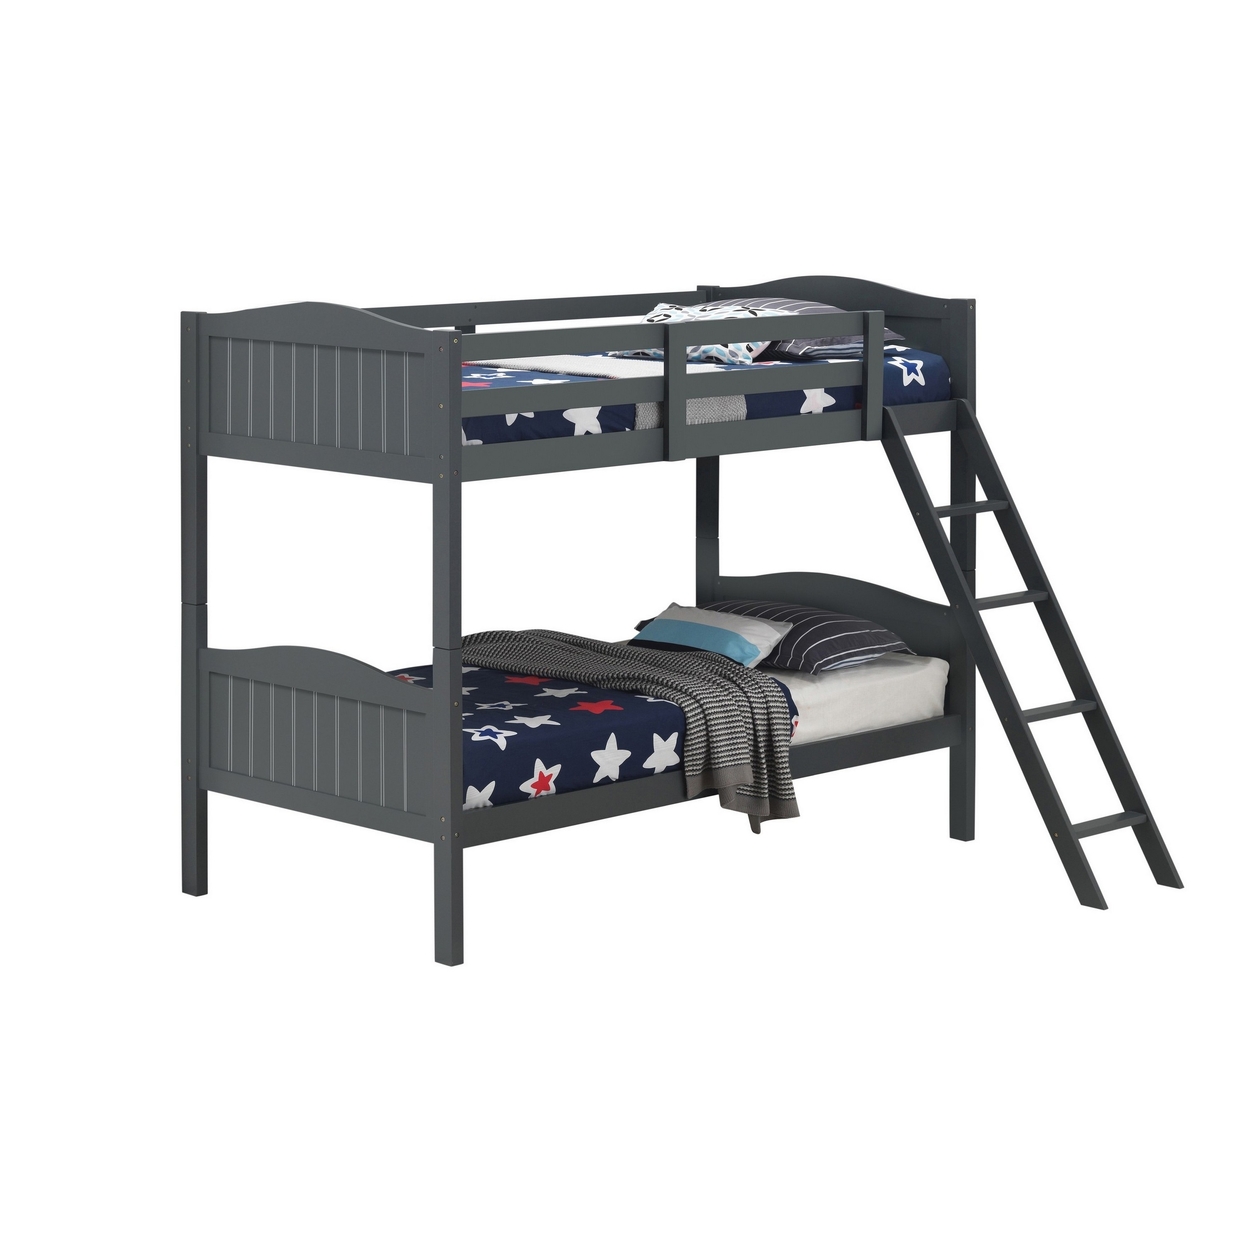 Mok Wood Twin Bunk Bed With Ladder And Guardrail, Farm Plank Style, Gray- Saltoro Sherpi